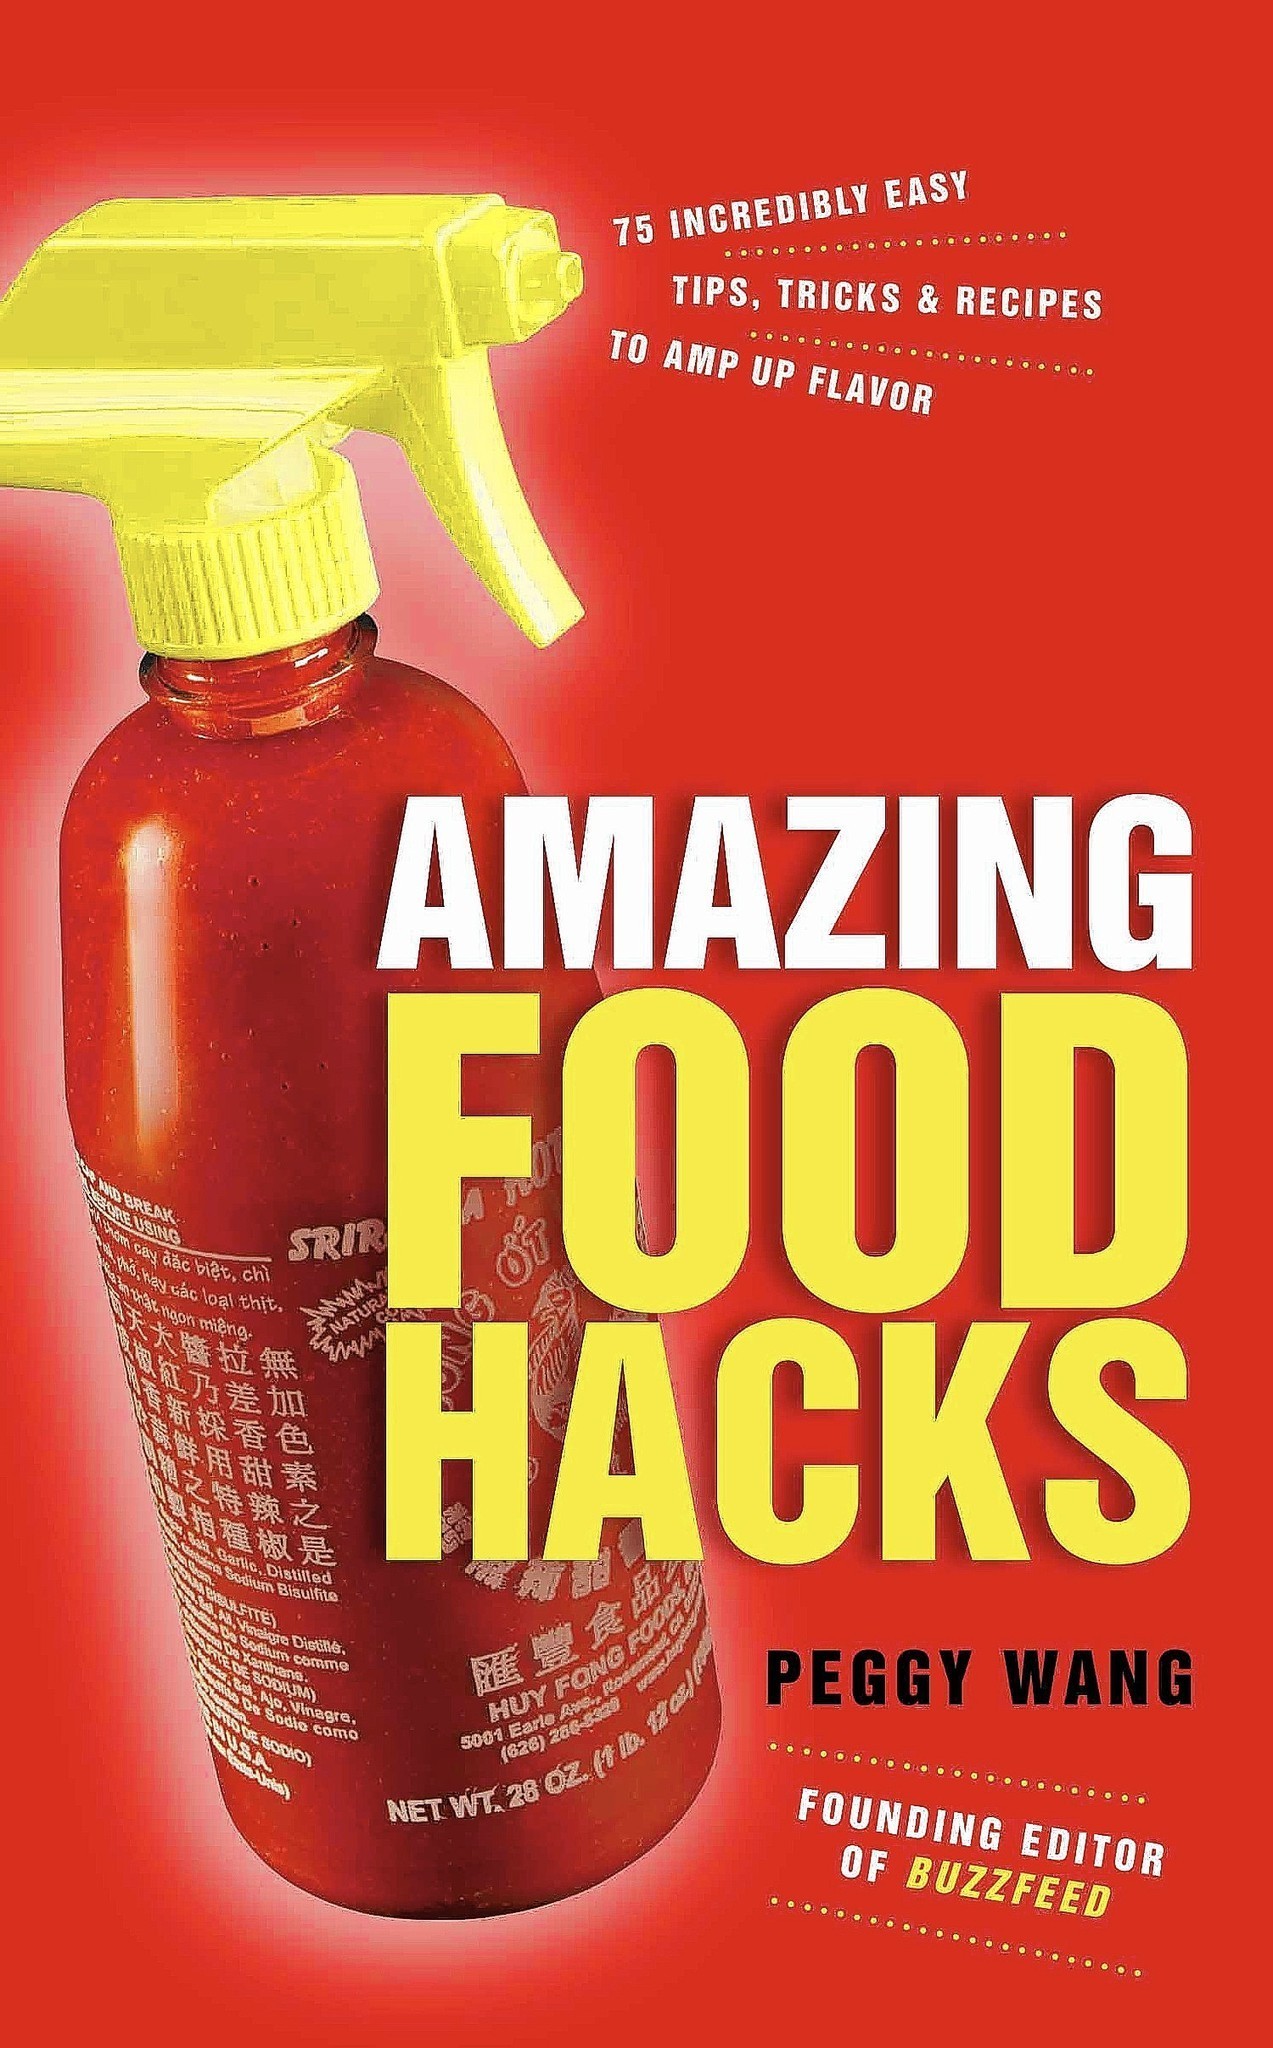 Amazing Food Hacks offers 75 tips to boost flavor - Chicago Tribune